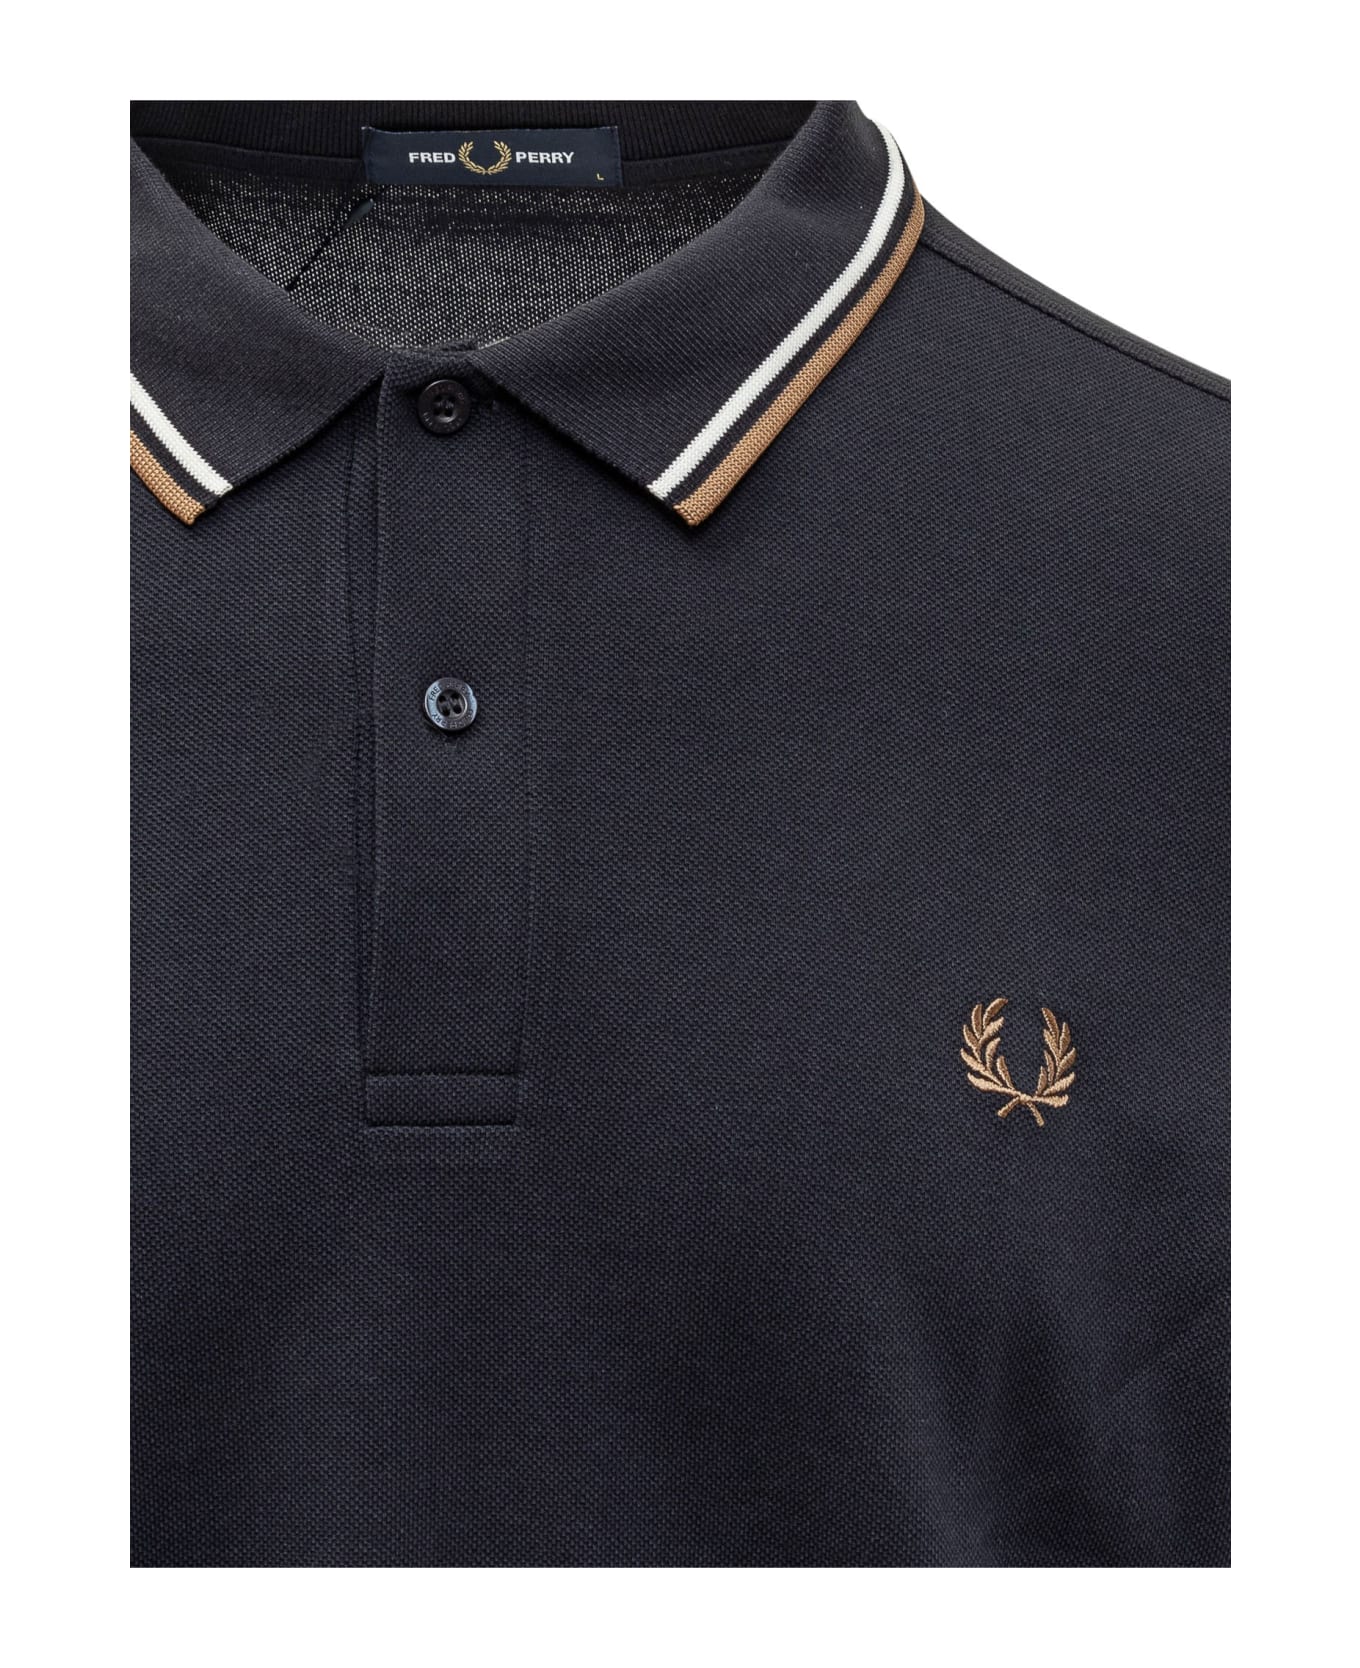 Fred Perry Polo Long Sleeves - NAVY/SNOWH/SHSTO ポロシャツ